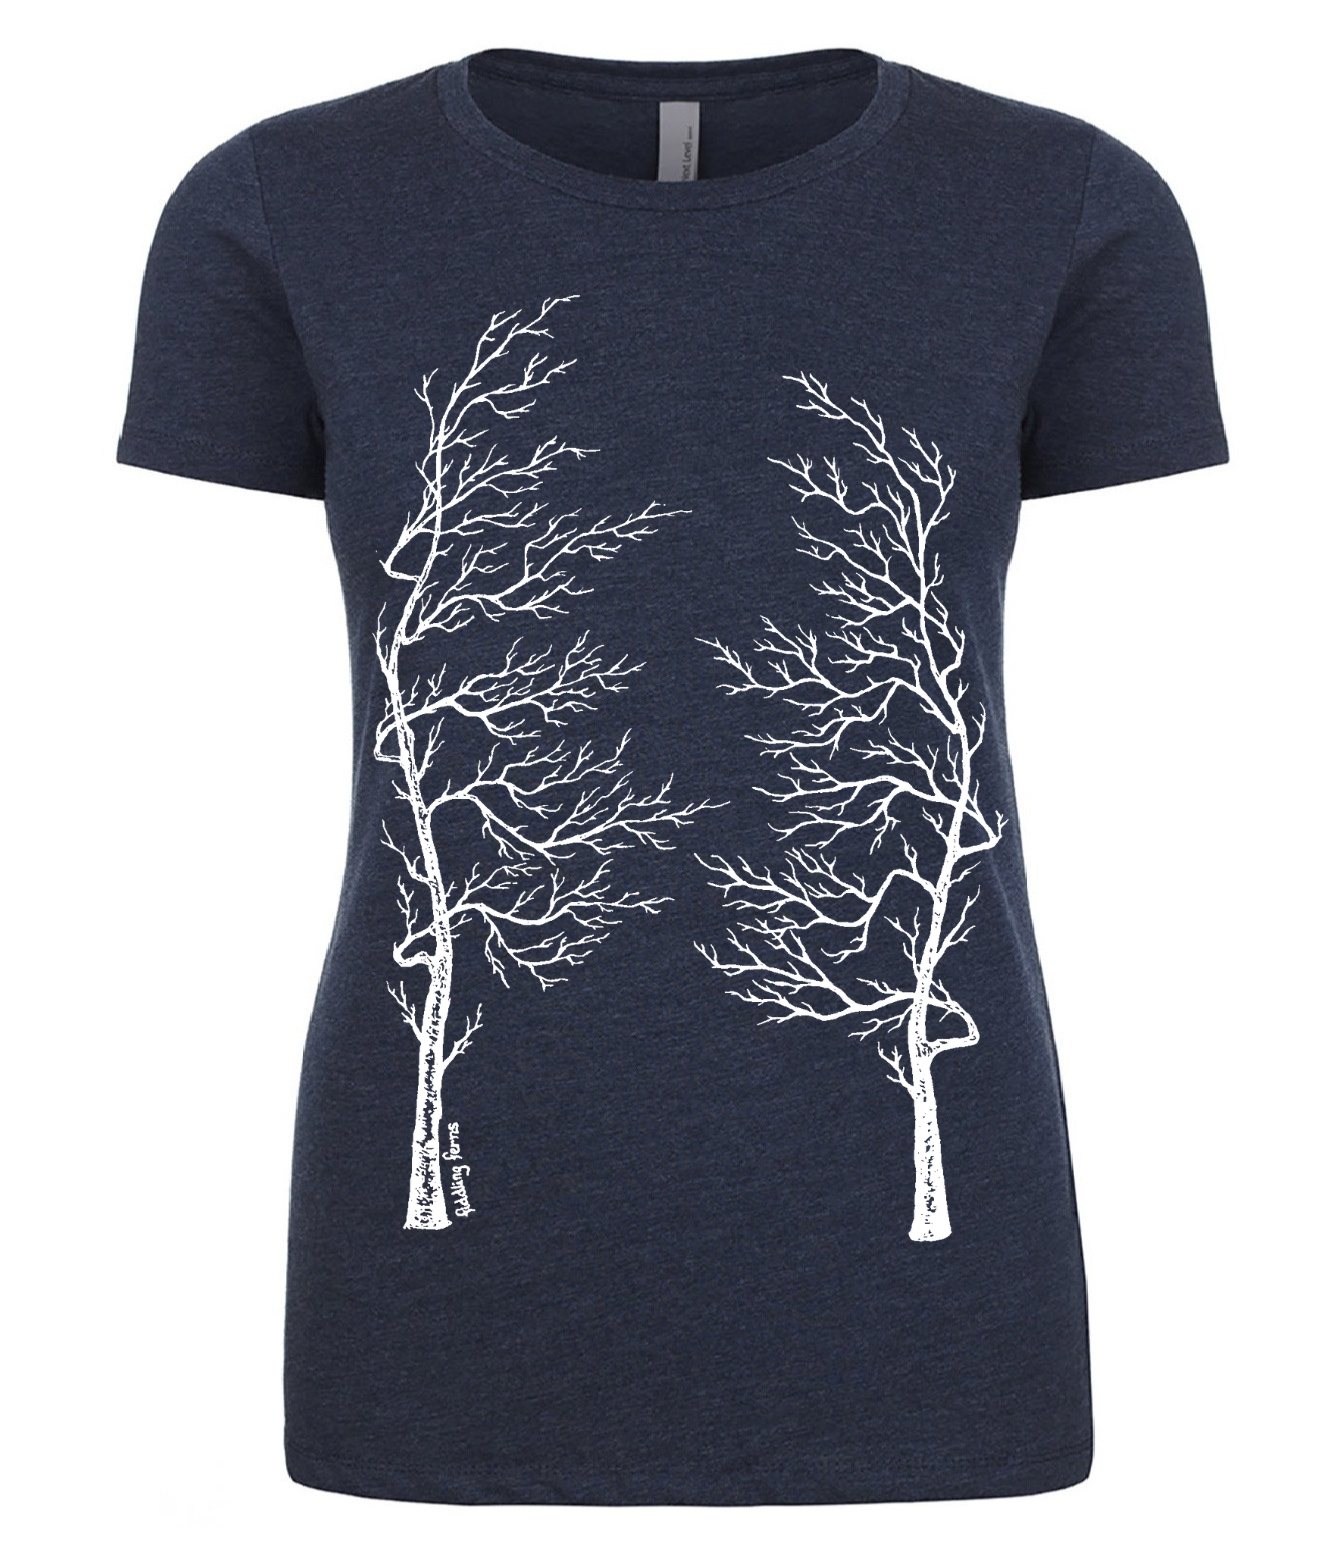 Bare Trees as Lungs Ladies T Shirt